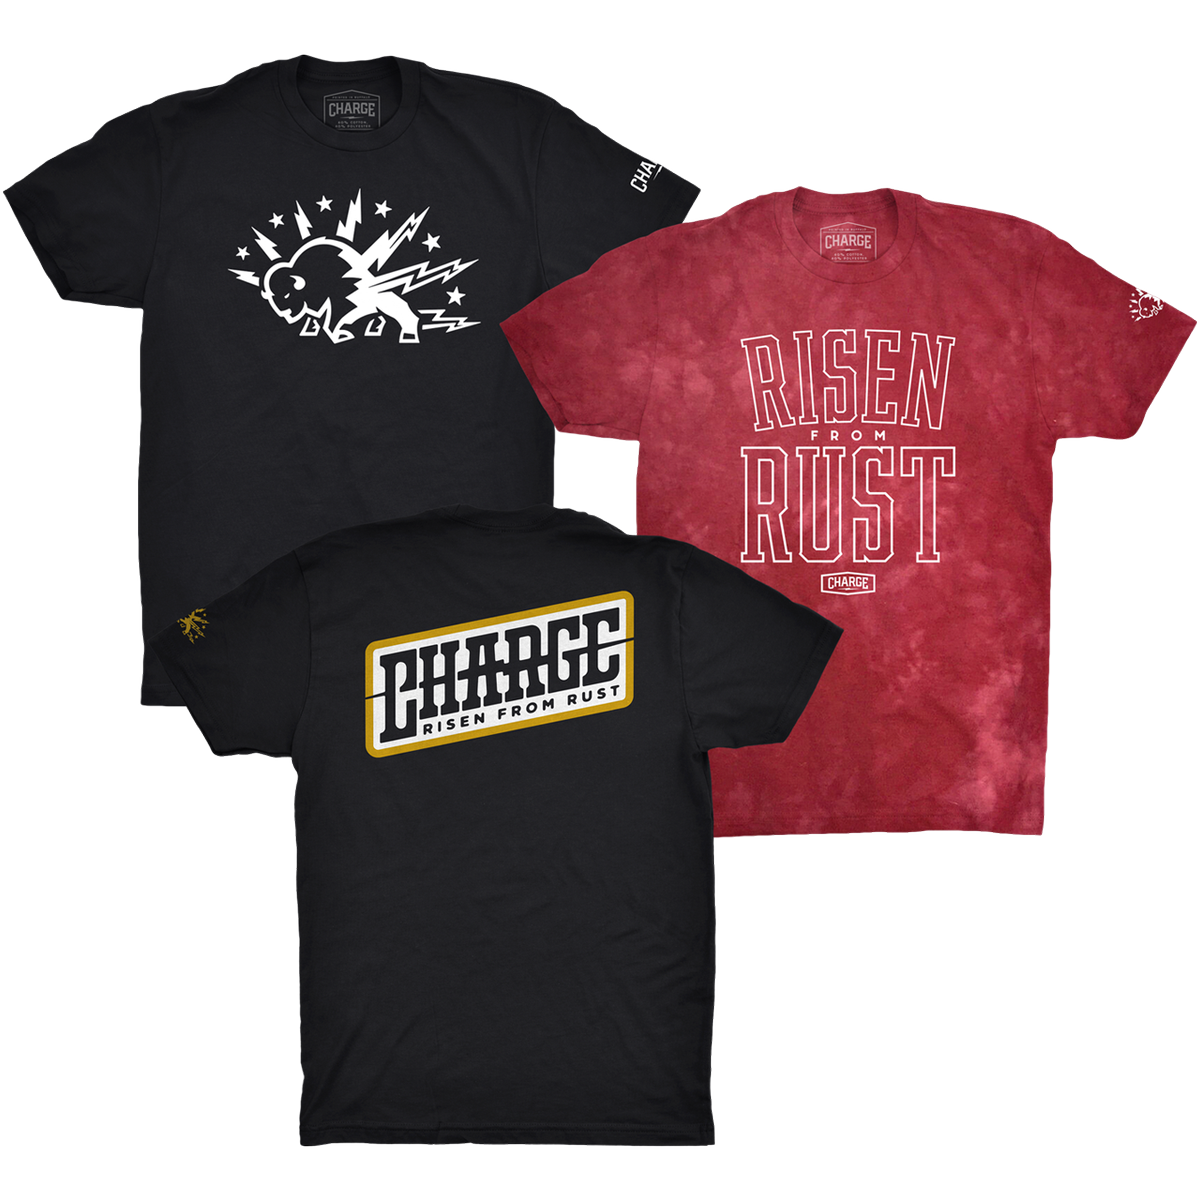 But wait! There’s more! @chargebflo has dropped a ton of new gear to celebrate its second anniversary:  http://chargebflo.com   #RisenFromRust 